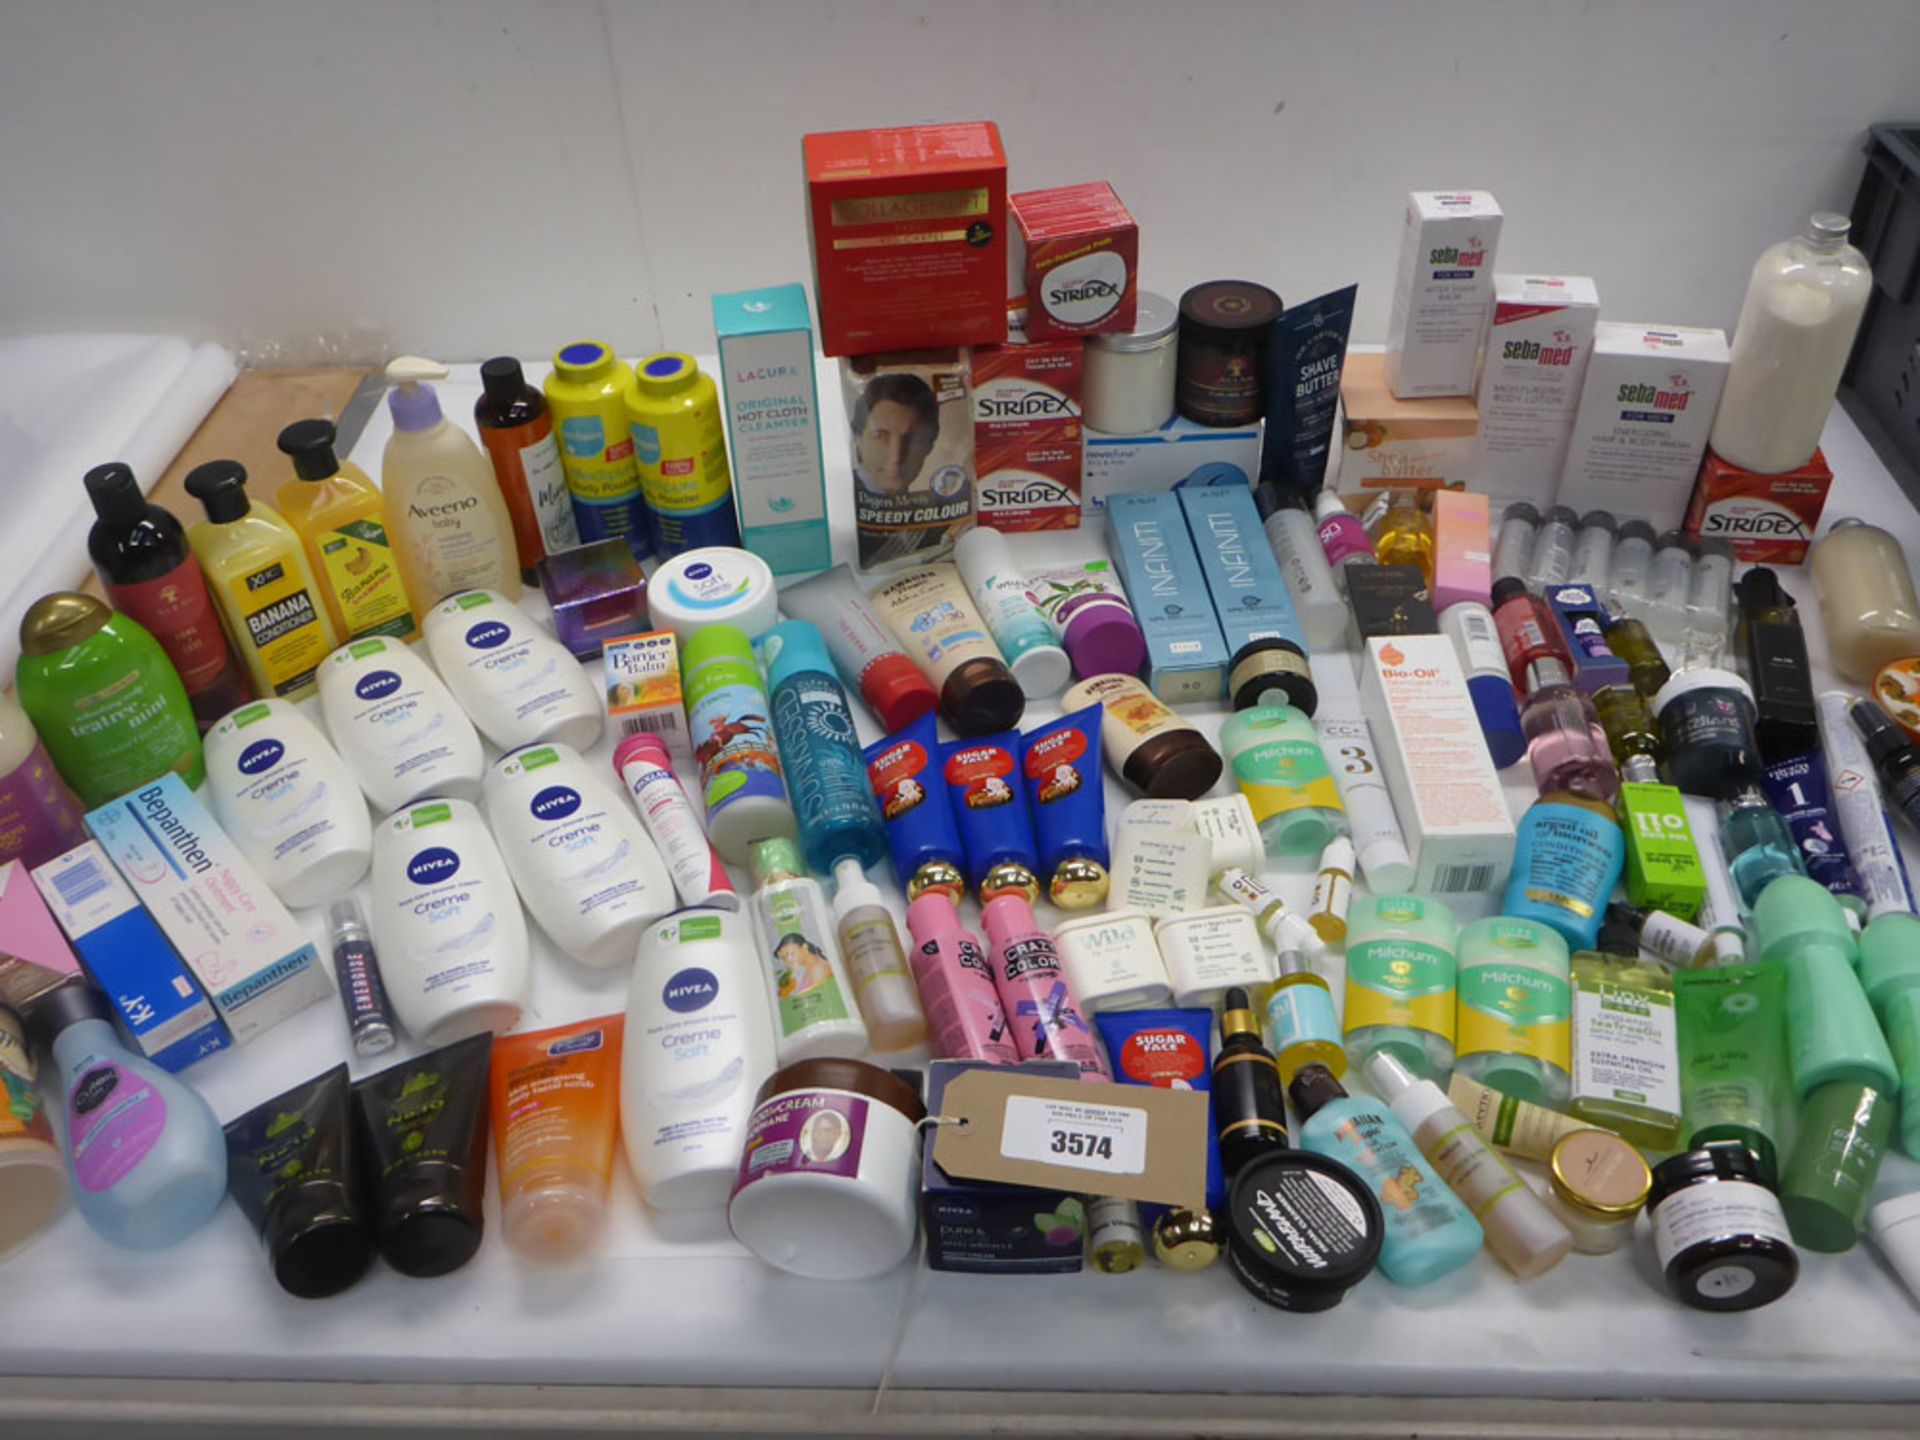 Large bag of toiletries including cleanser, shower cream, lotions, shave balm, hair products, anti-